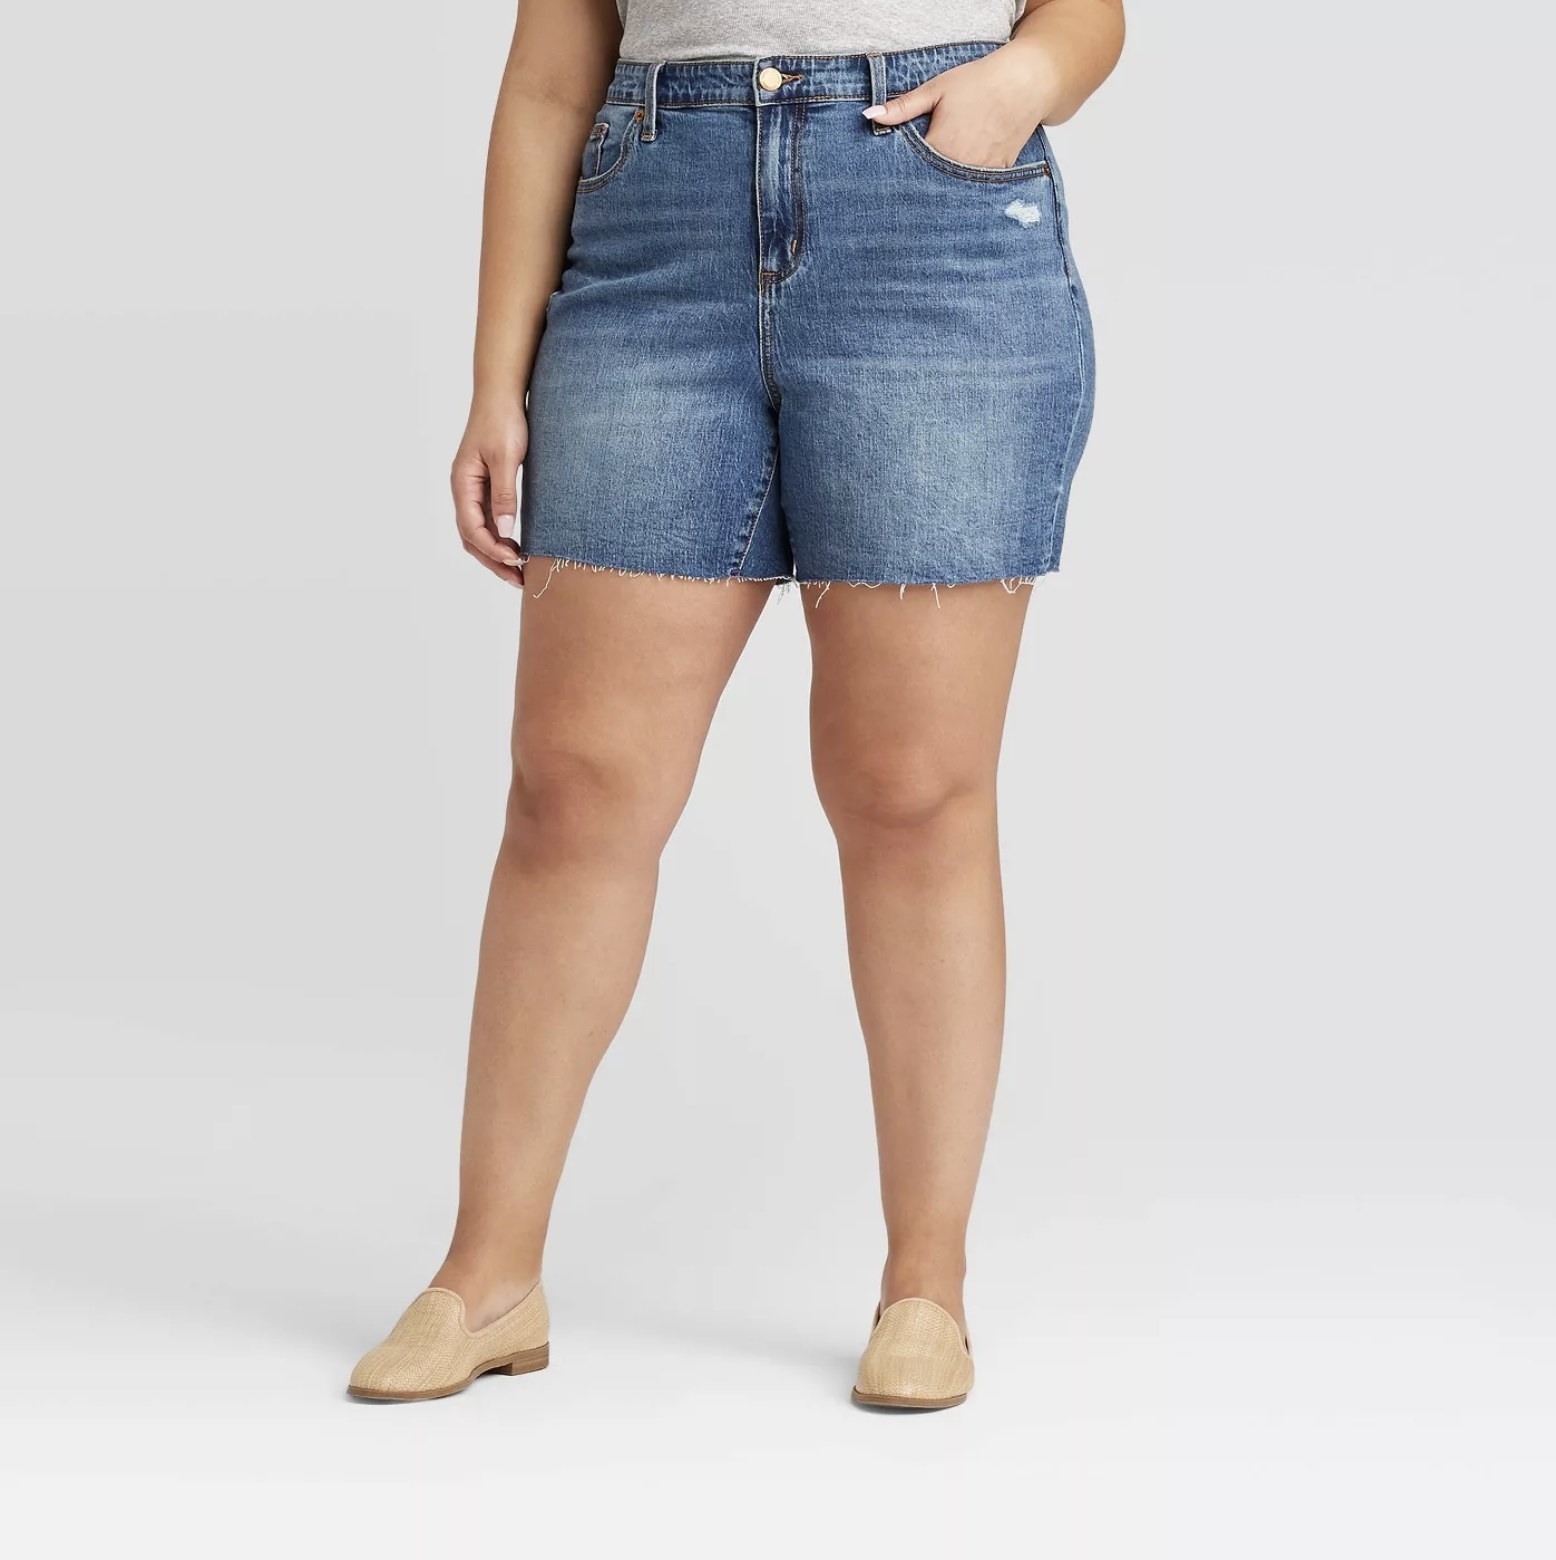 Model is wearing mid-thigh, high-waisted denim shorts in a classic denim blue with distressed hemline and light wash on the thighs